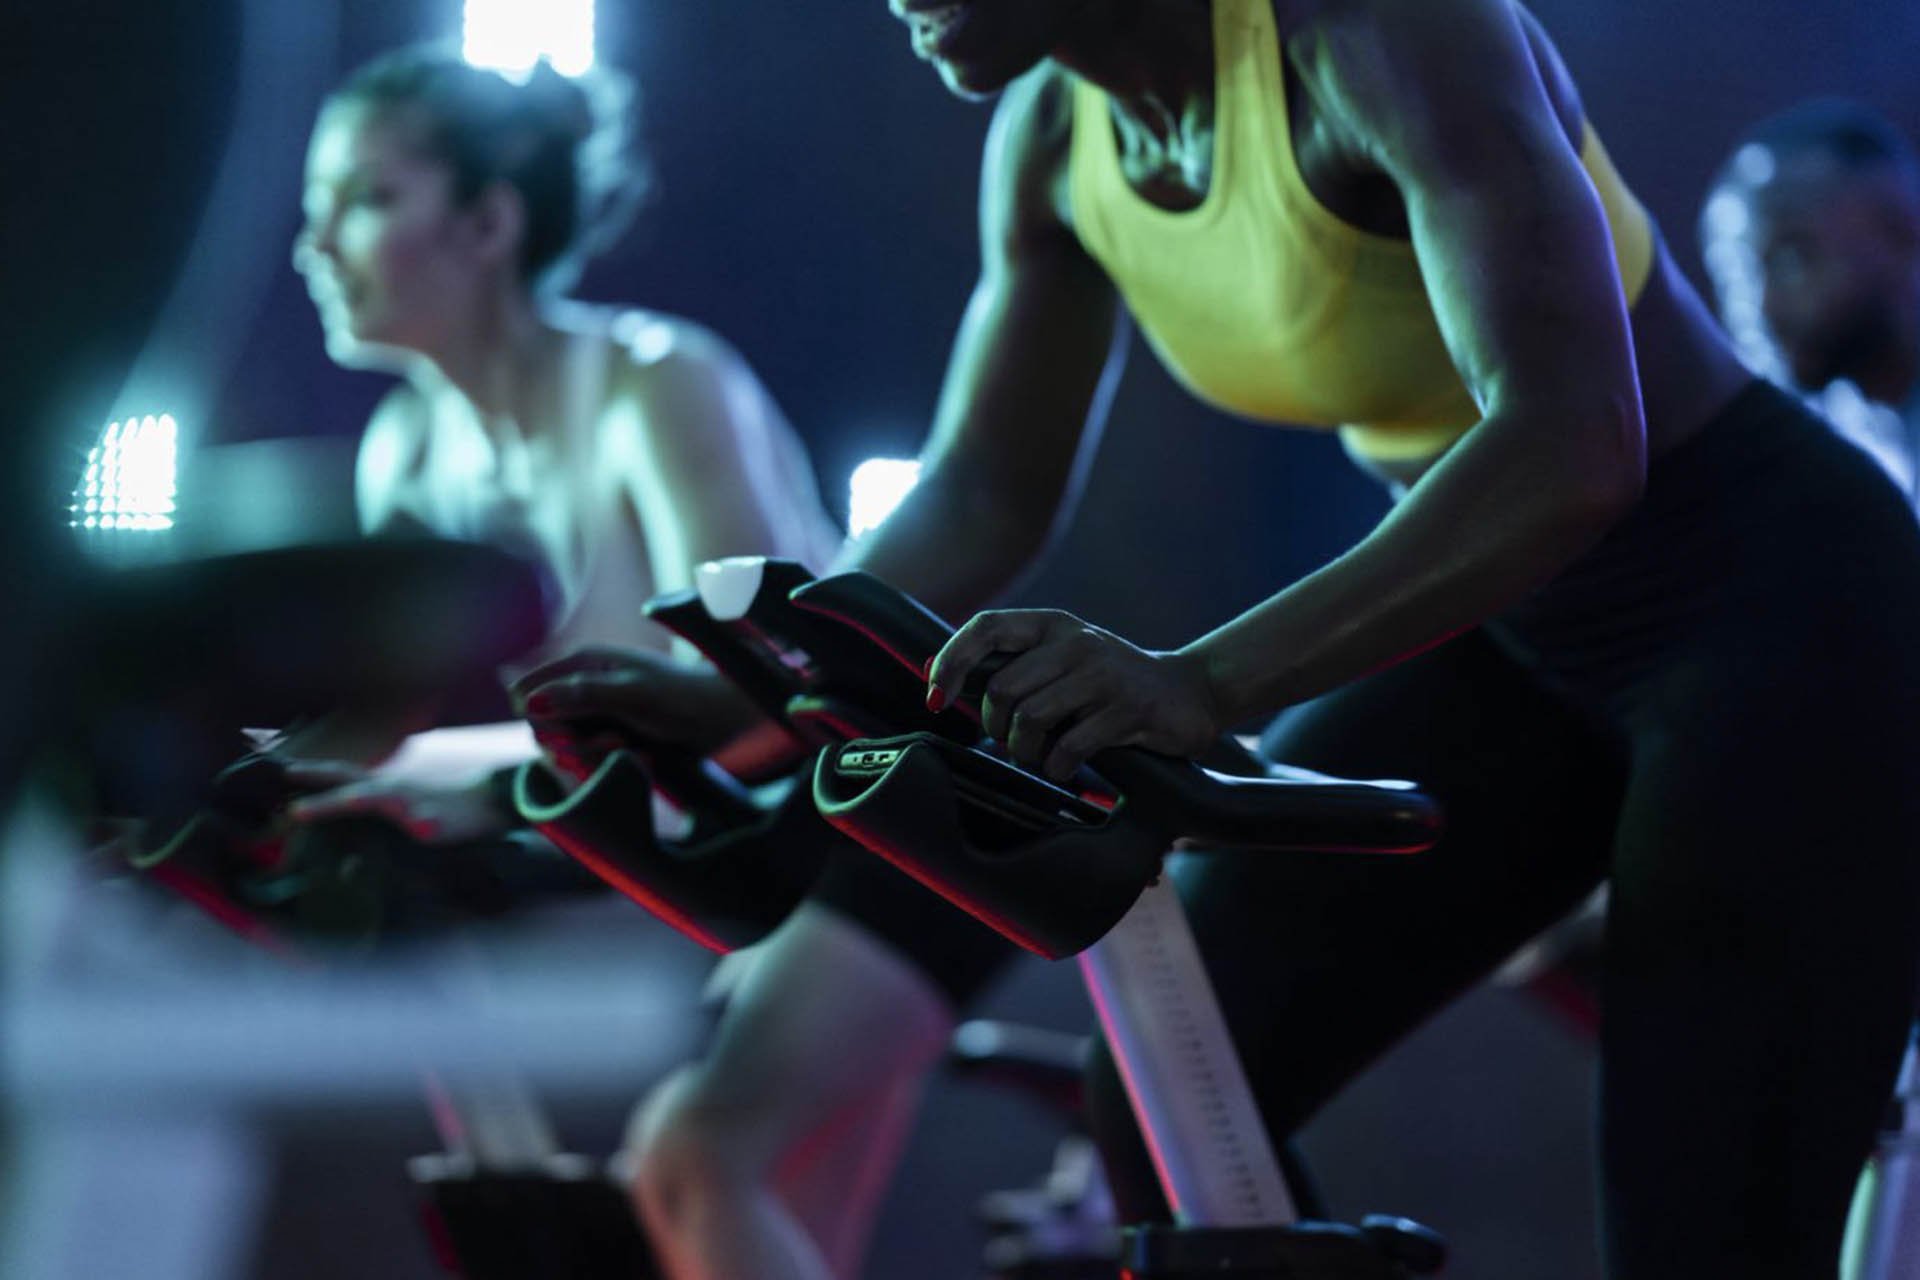 Spin Class at The Wrightington Hotel Health club and Spa